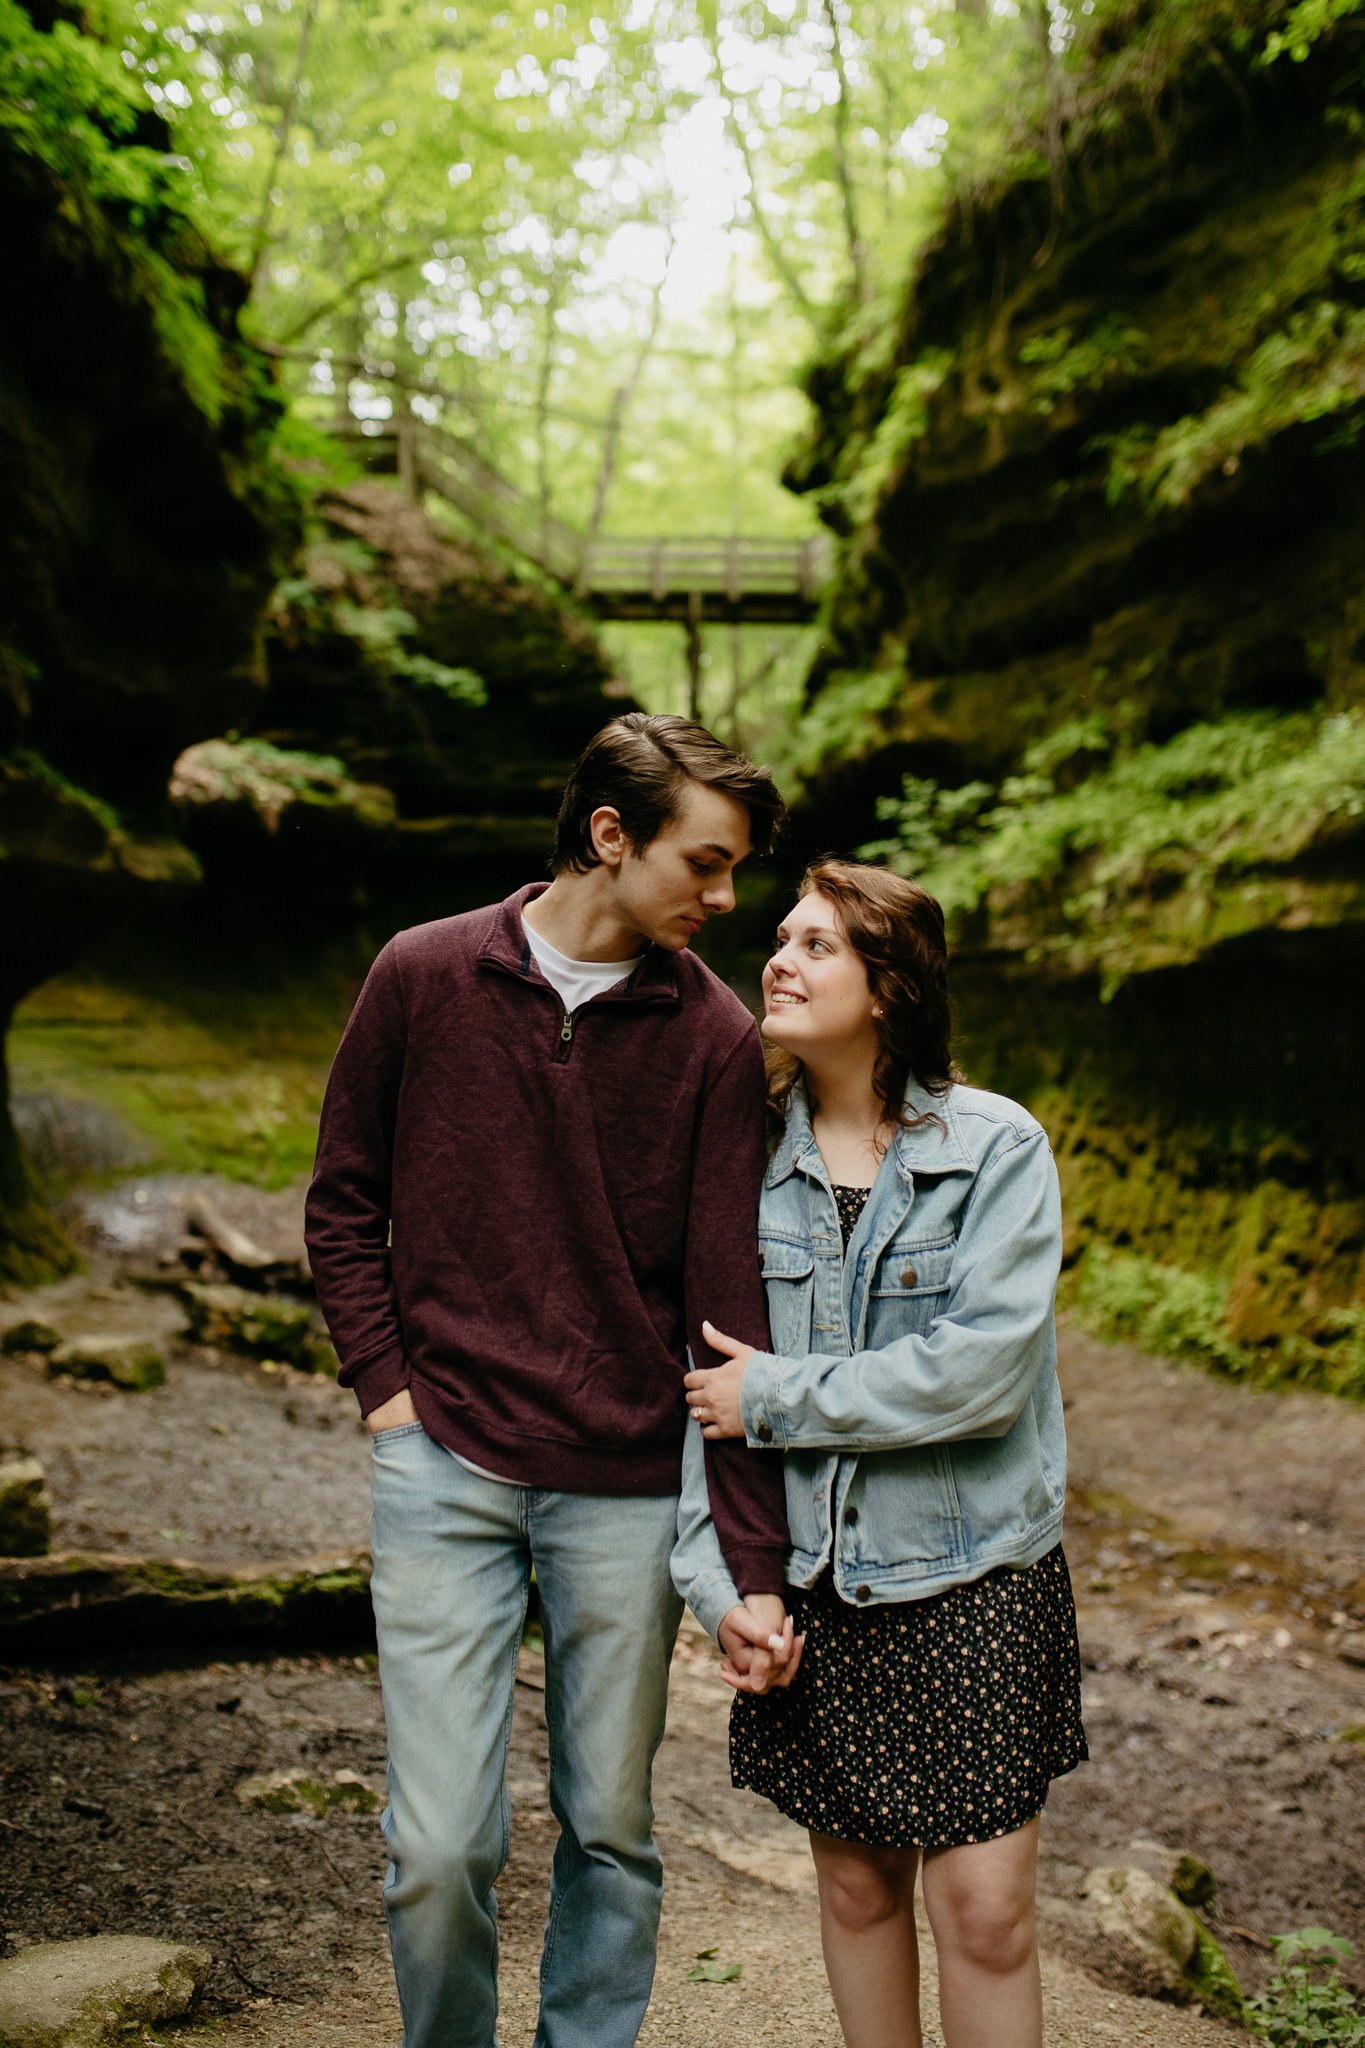 Summer Morning Engagement Session at Shades State Park